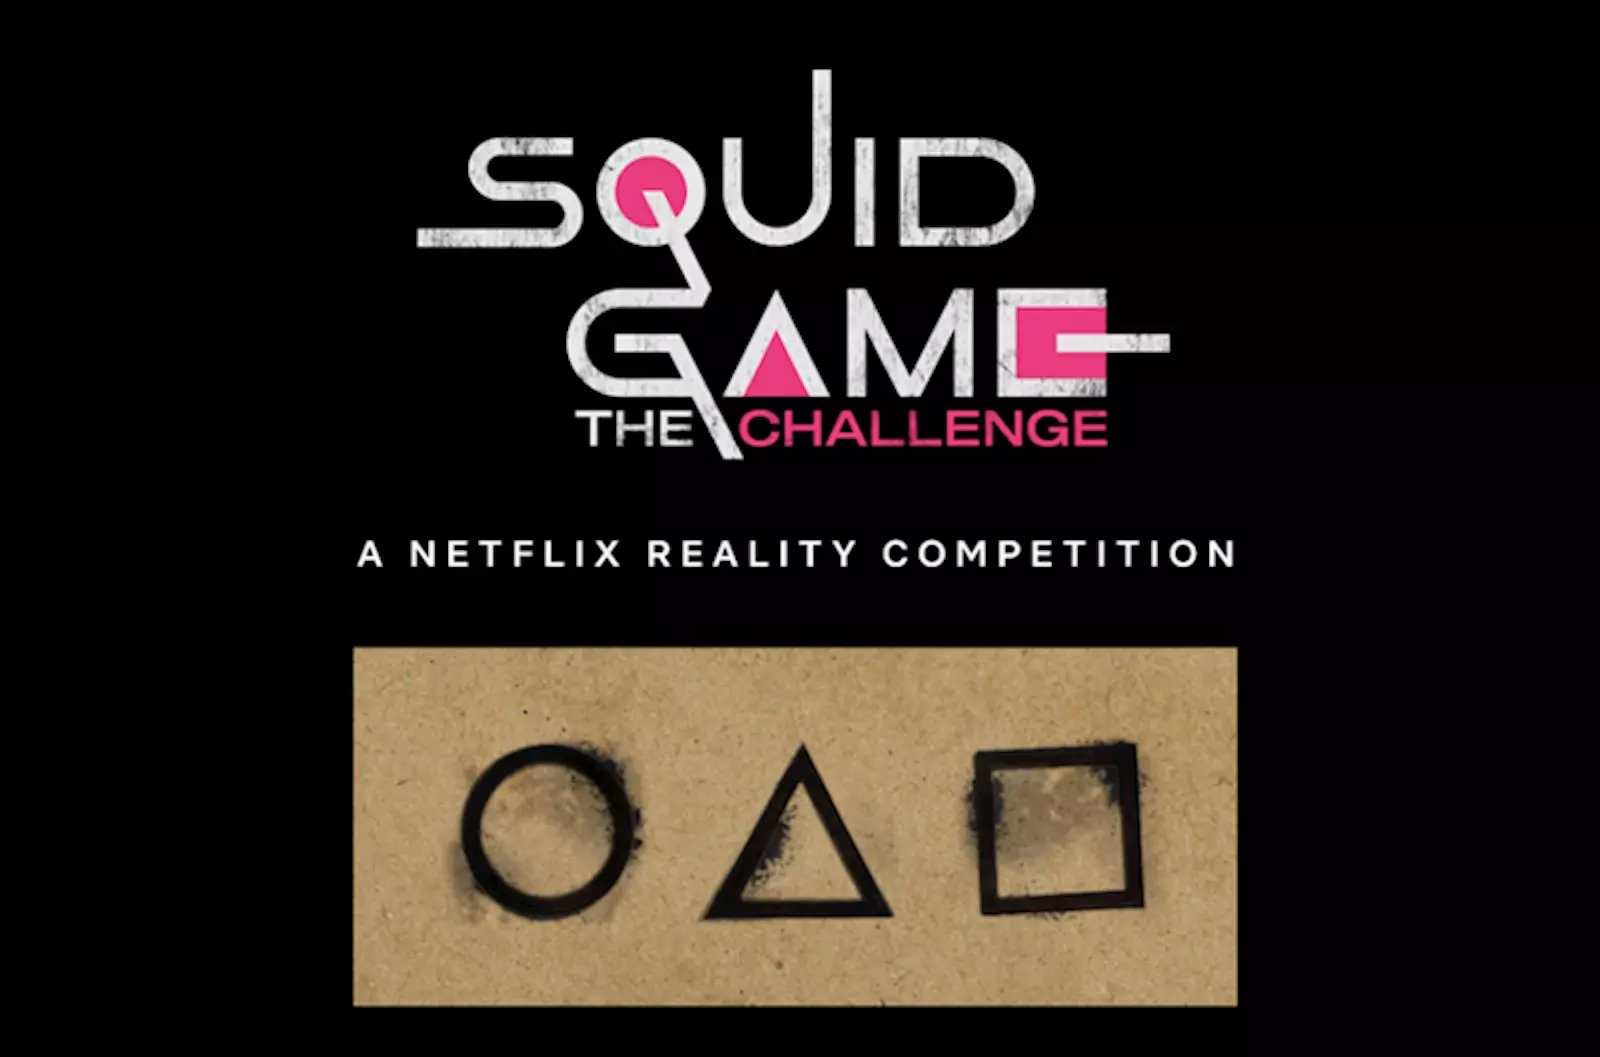 The magical realism of 'Squid Game' shows the contradictions of